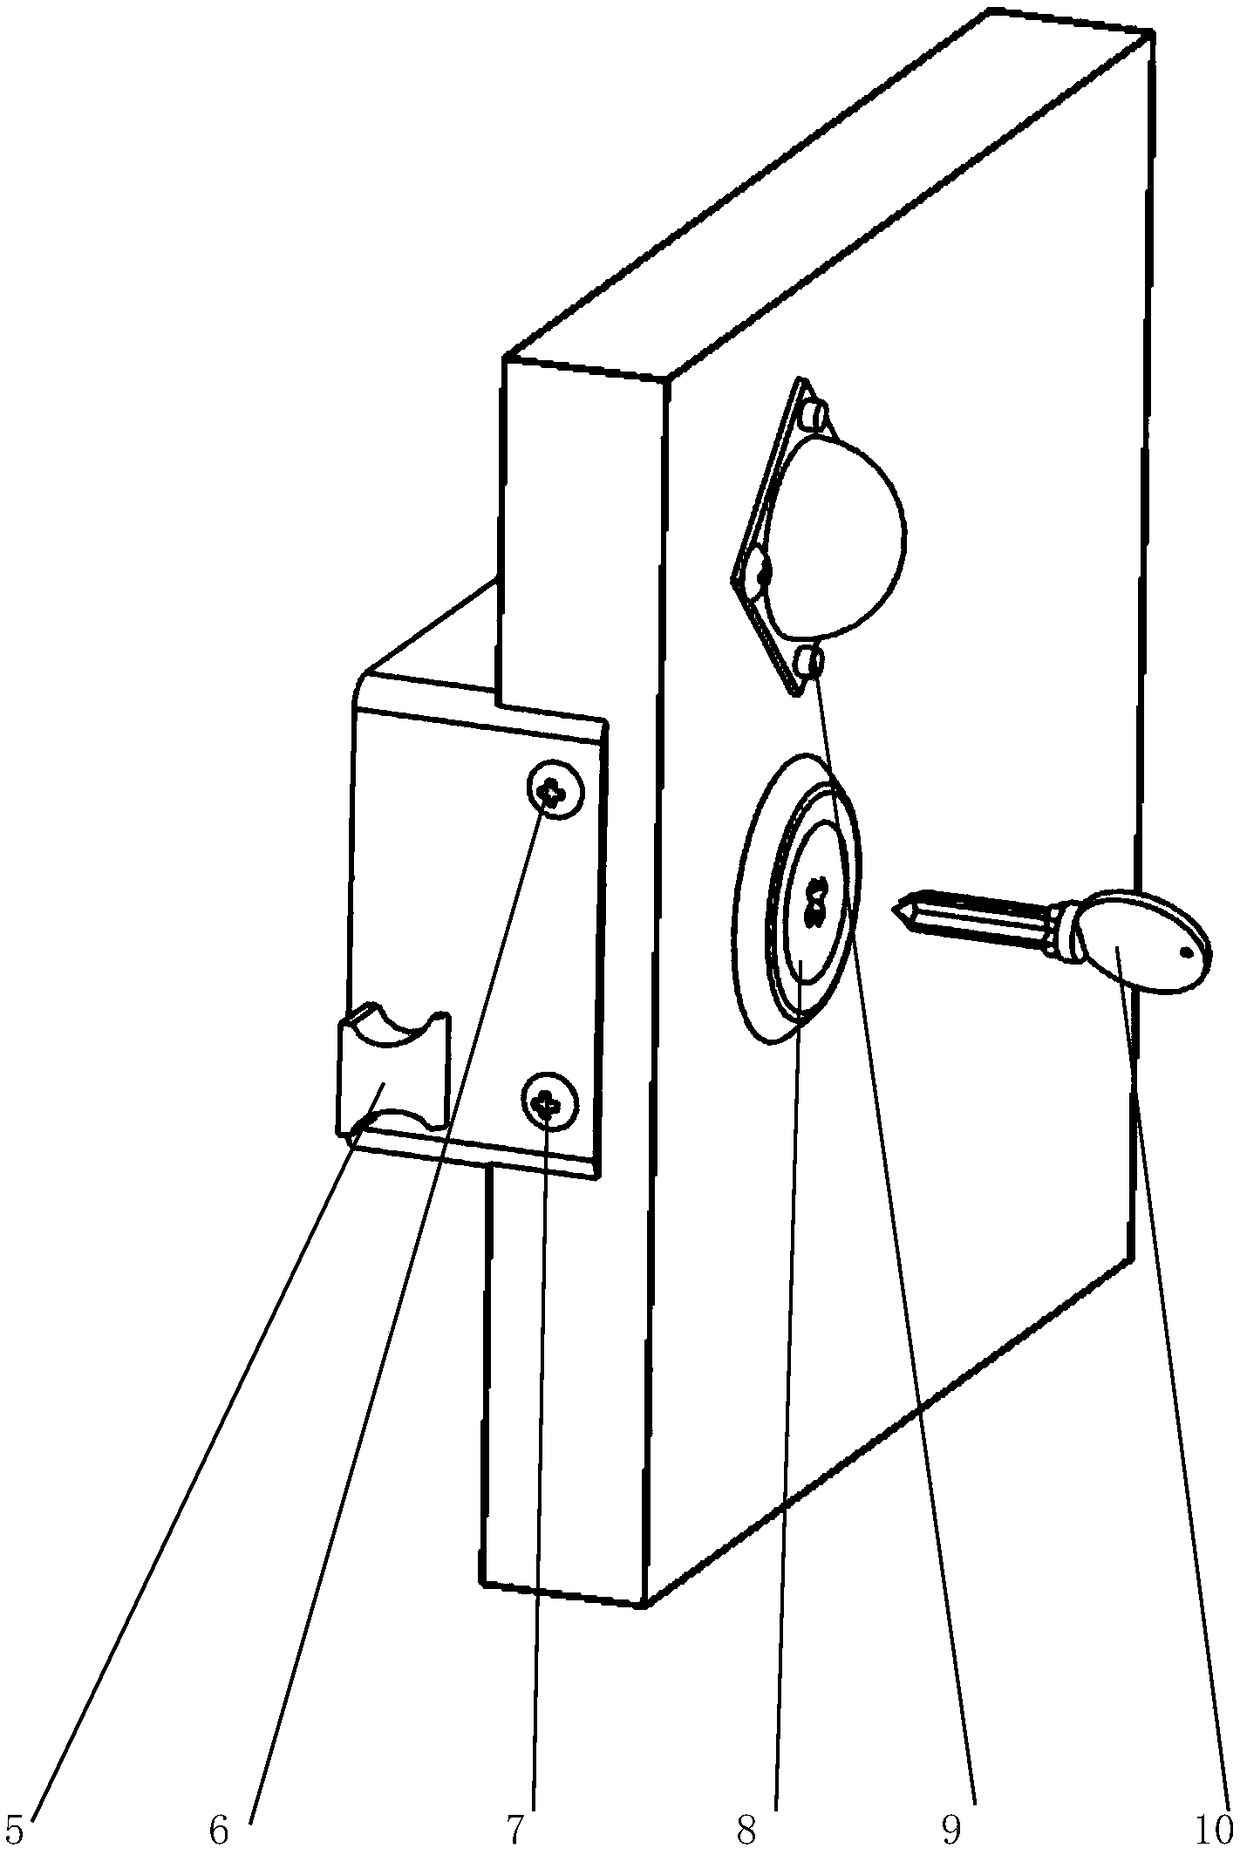 Door lock device with alarming function and illuminating function